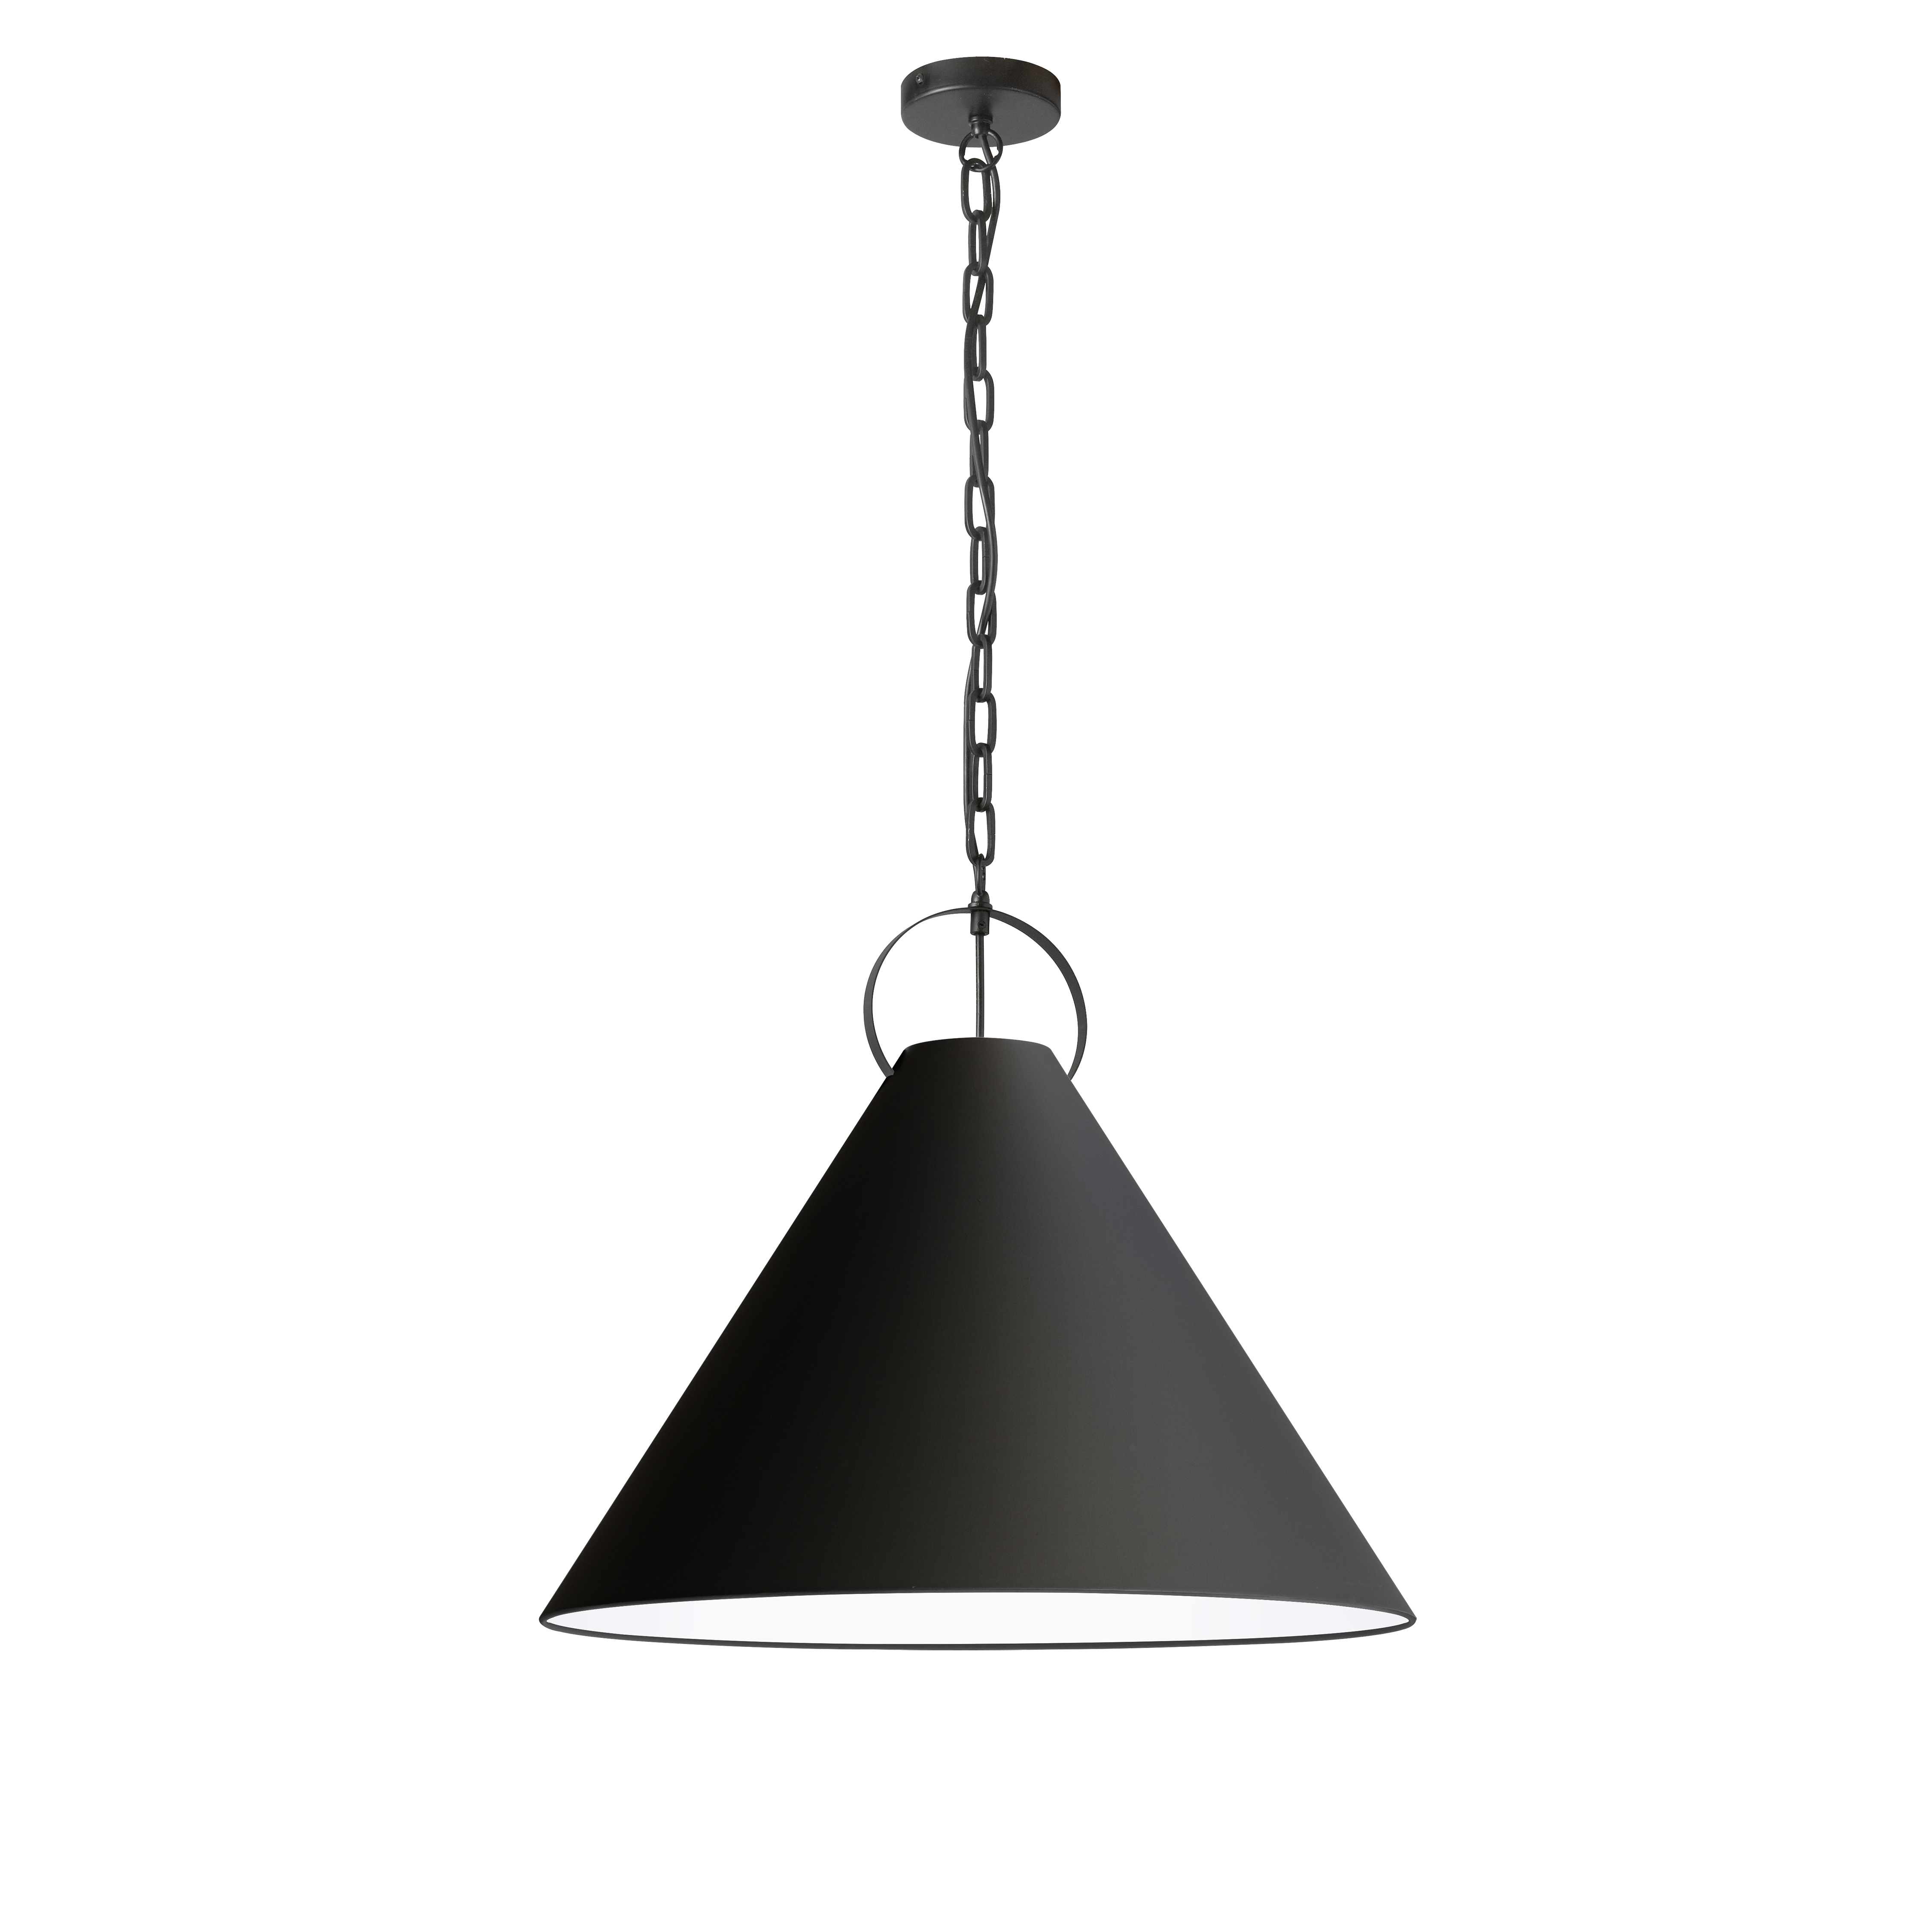 The Princeton family of lighting features a stylish profile that draws the eye. With its refined proportions and sense of detail, it comes in a range of sizes to suit any size room. A metal chain drop incorporates a circular element of the frame that encompasses the tapered end of the fabric drum shade. With color combinations from fashionable monochromatic to strikingly artful contrasts, it's a versatile look for contemporary homes. Princeton lighting adds a touch of elegance and luxury to kitchens and dining rooms, and sets a chic tone for the foyer of your home.